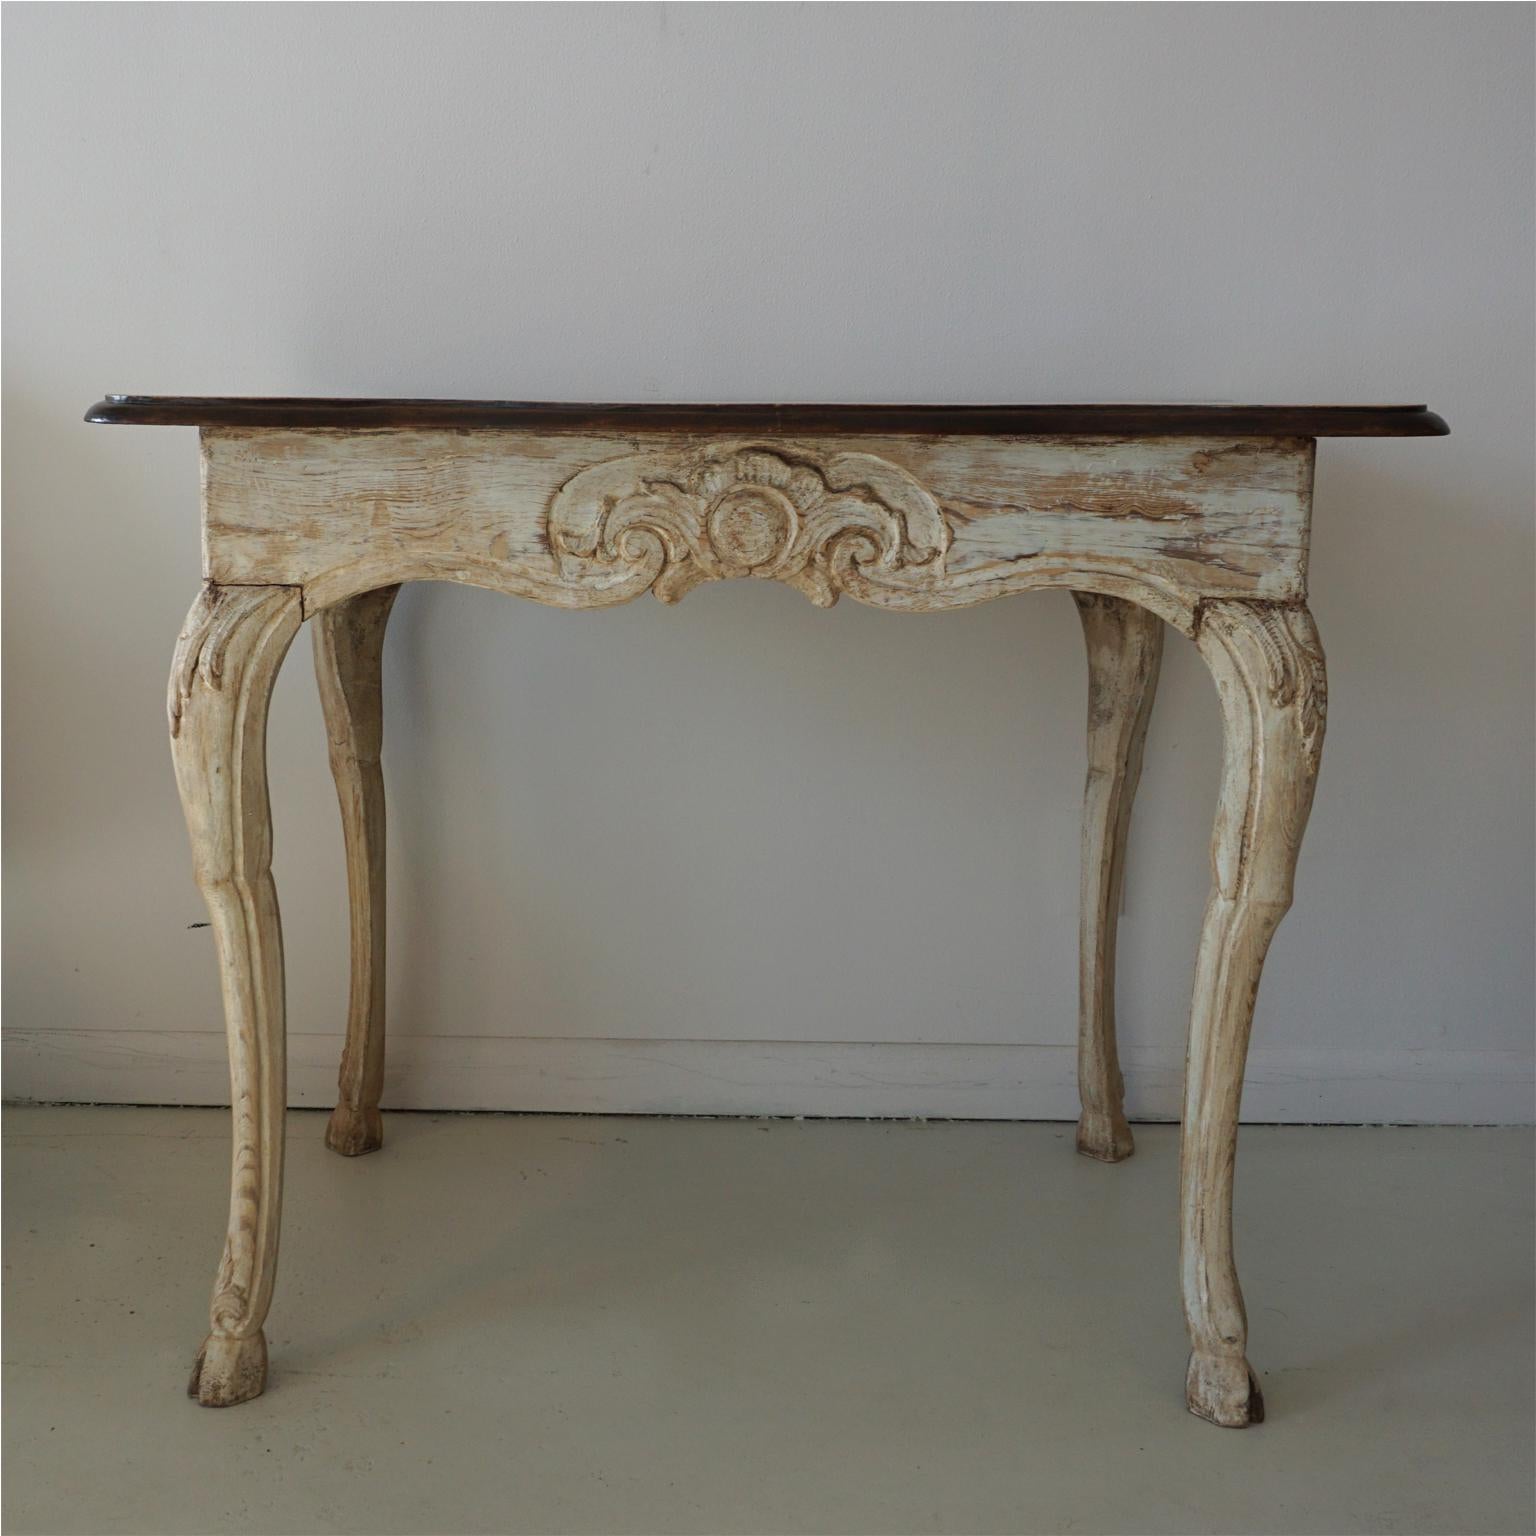 A light-brown, antique German hand carved Walnut wooden baroque side table with a white washed original finish, the table top is adorned with beautiful wood inlays, in good condition. Marked Schloss Mainau, which is a castle in the Bodensee area,